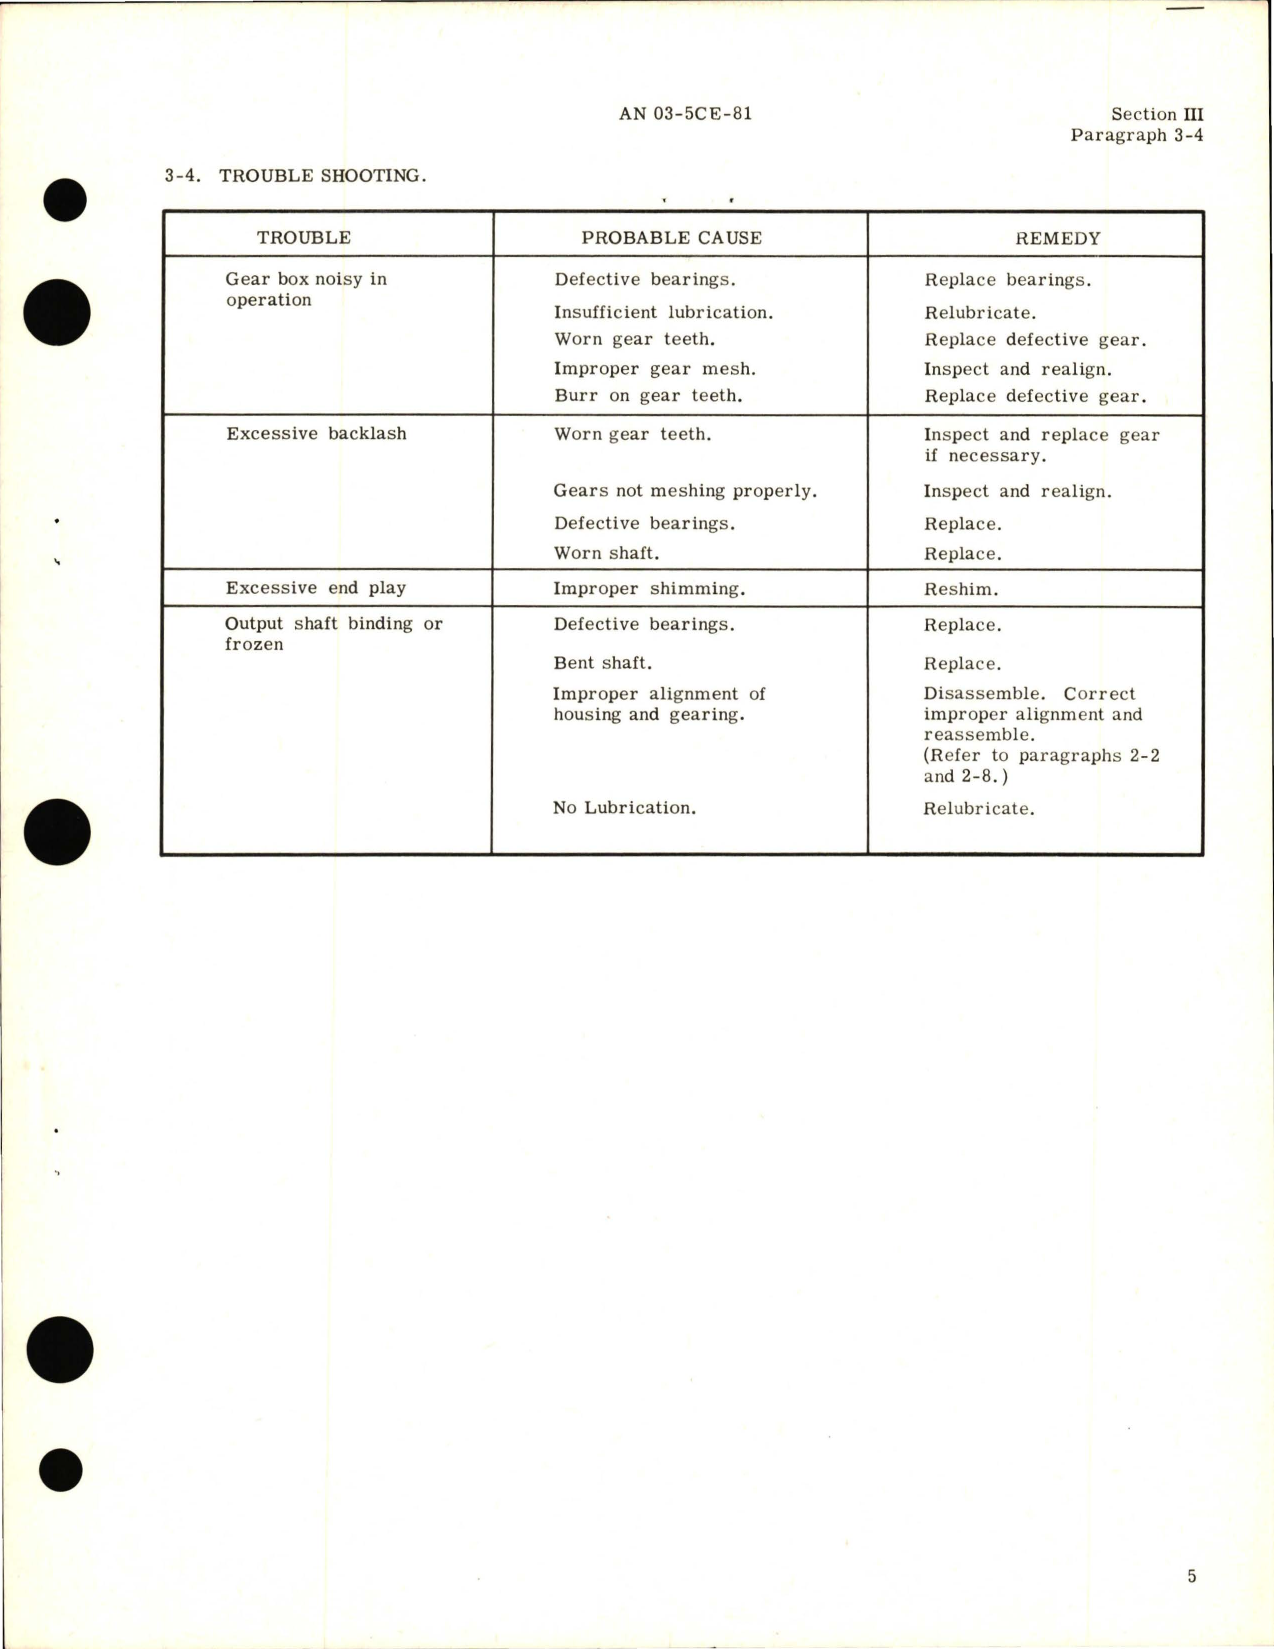 Sample page 5 from AirCorps Library document: Overhaul Instructions for T and H Drives